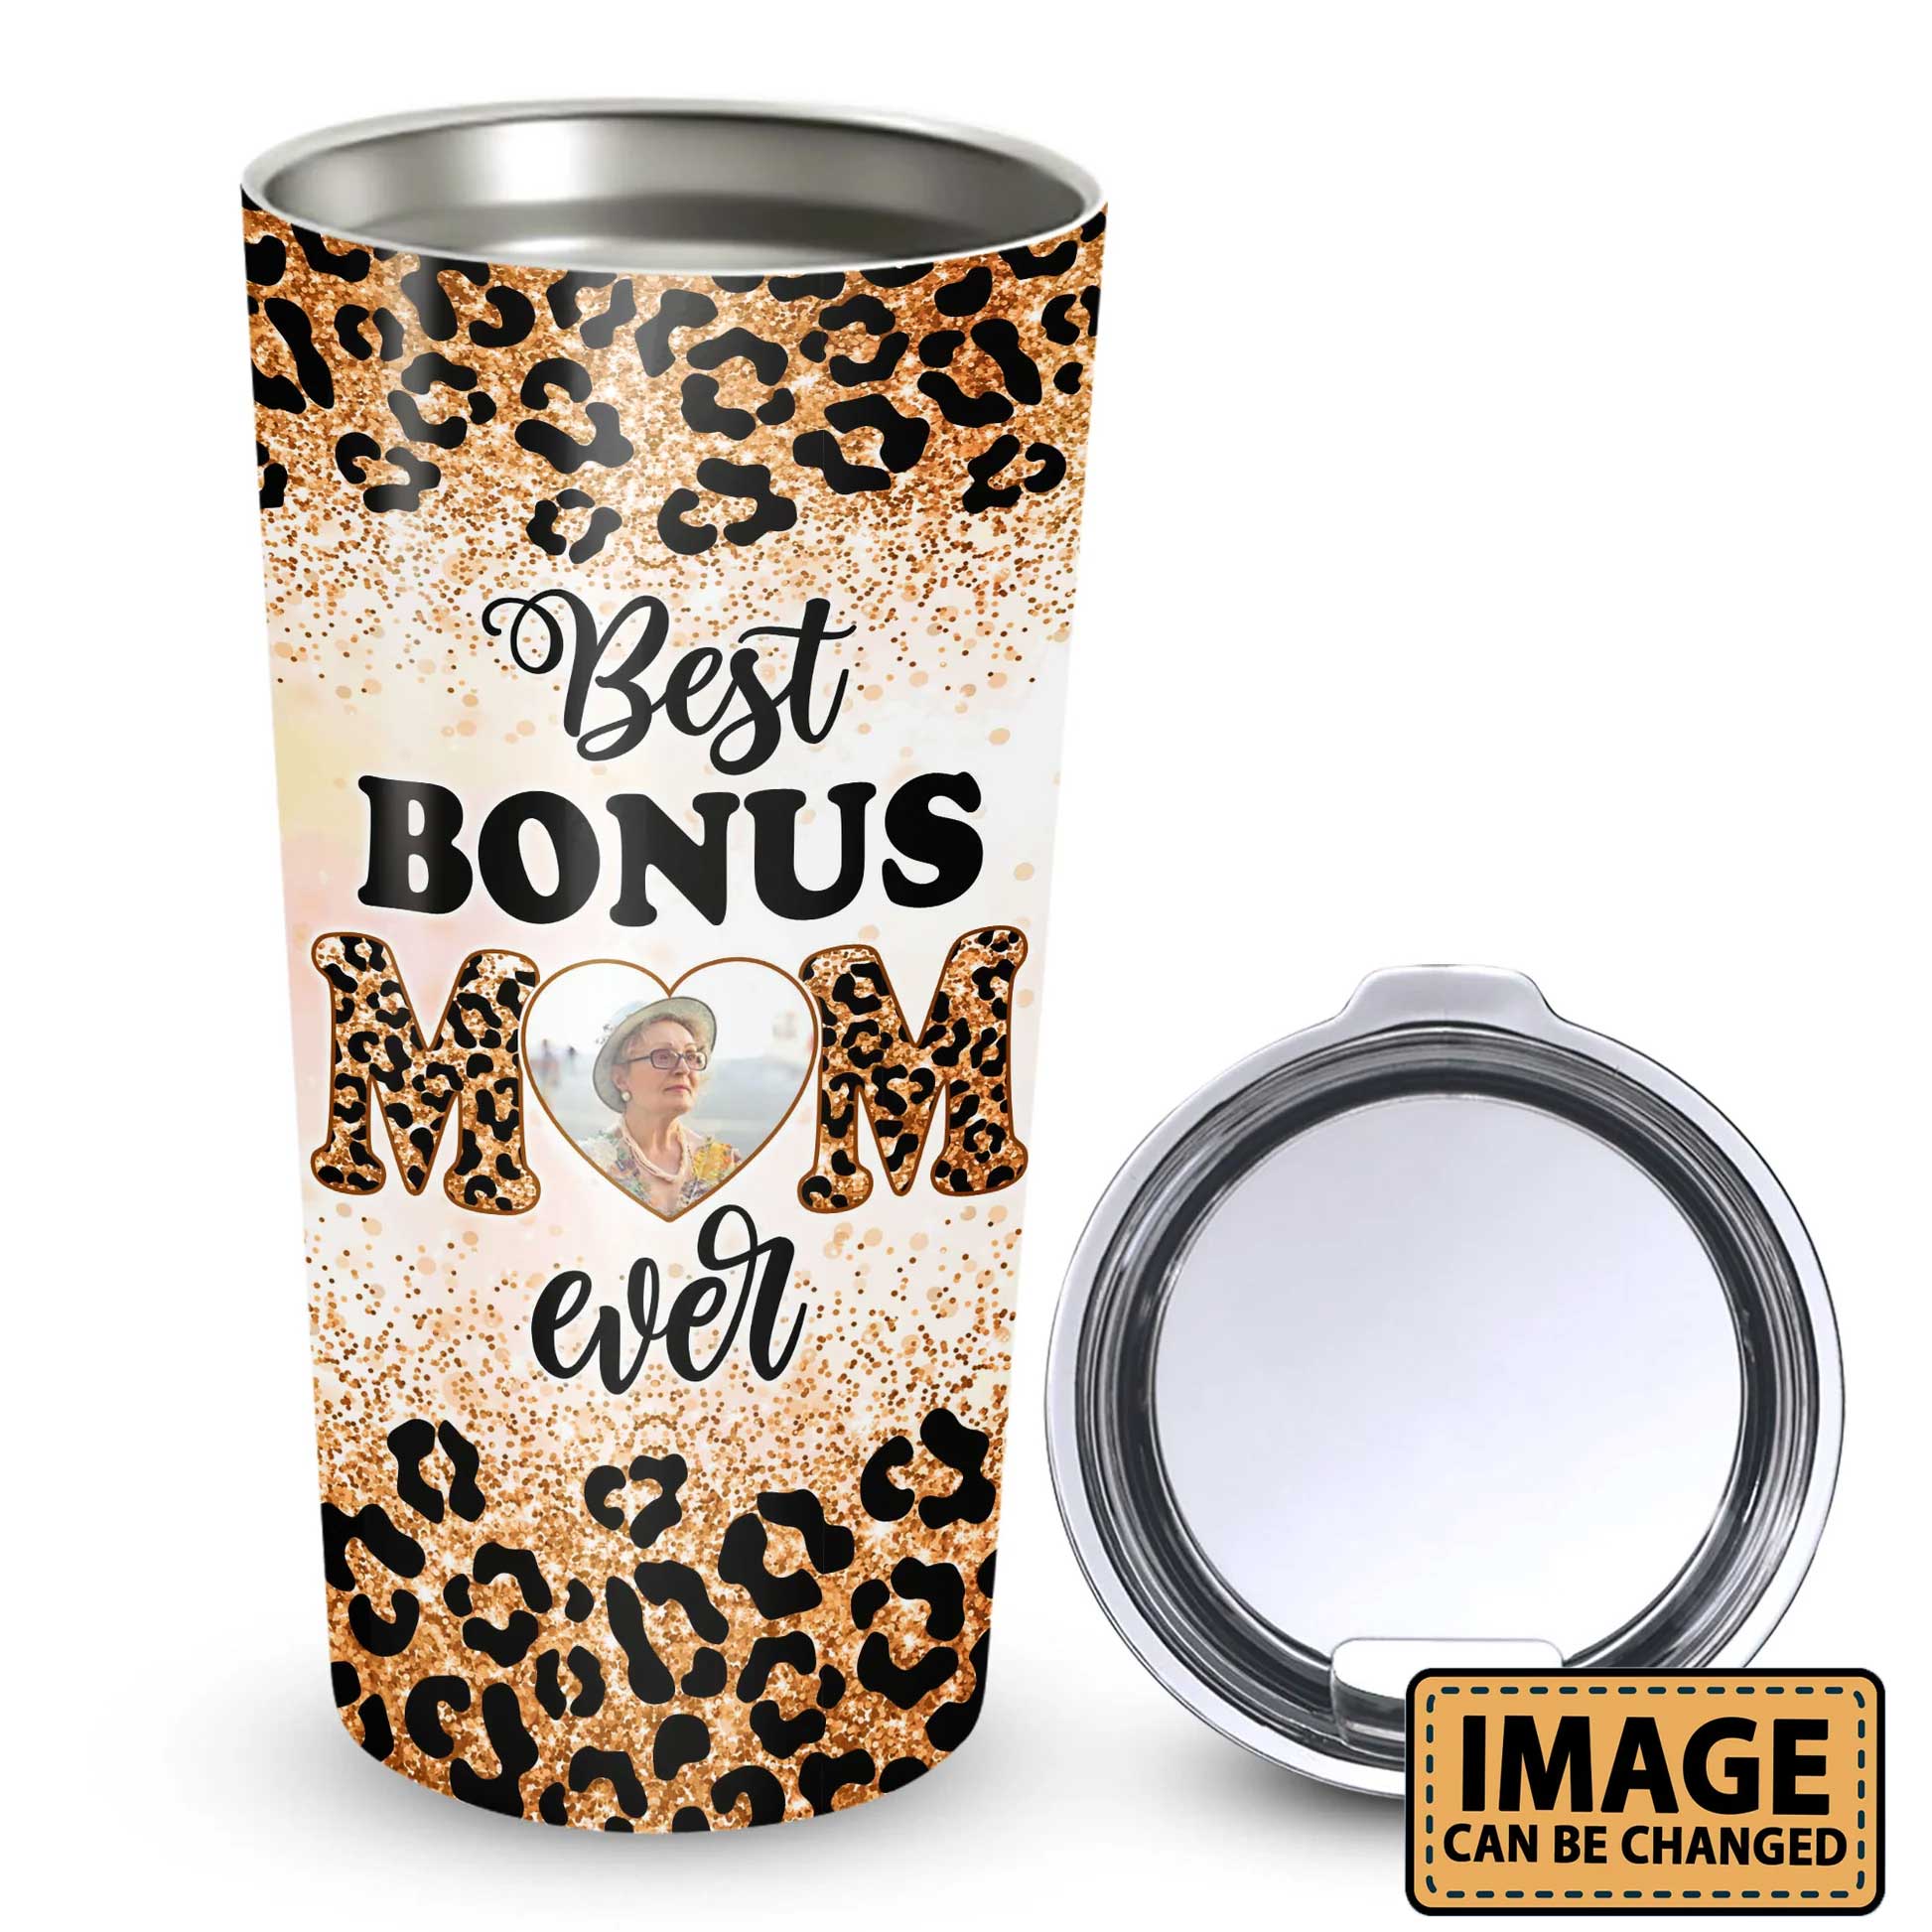 Personalized Mother's Day Gift Tumbler - Custom Gift For Mother's Day, Presents for Mom - Leopard Pattern, Best Bonus Mom Ever Tumbler